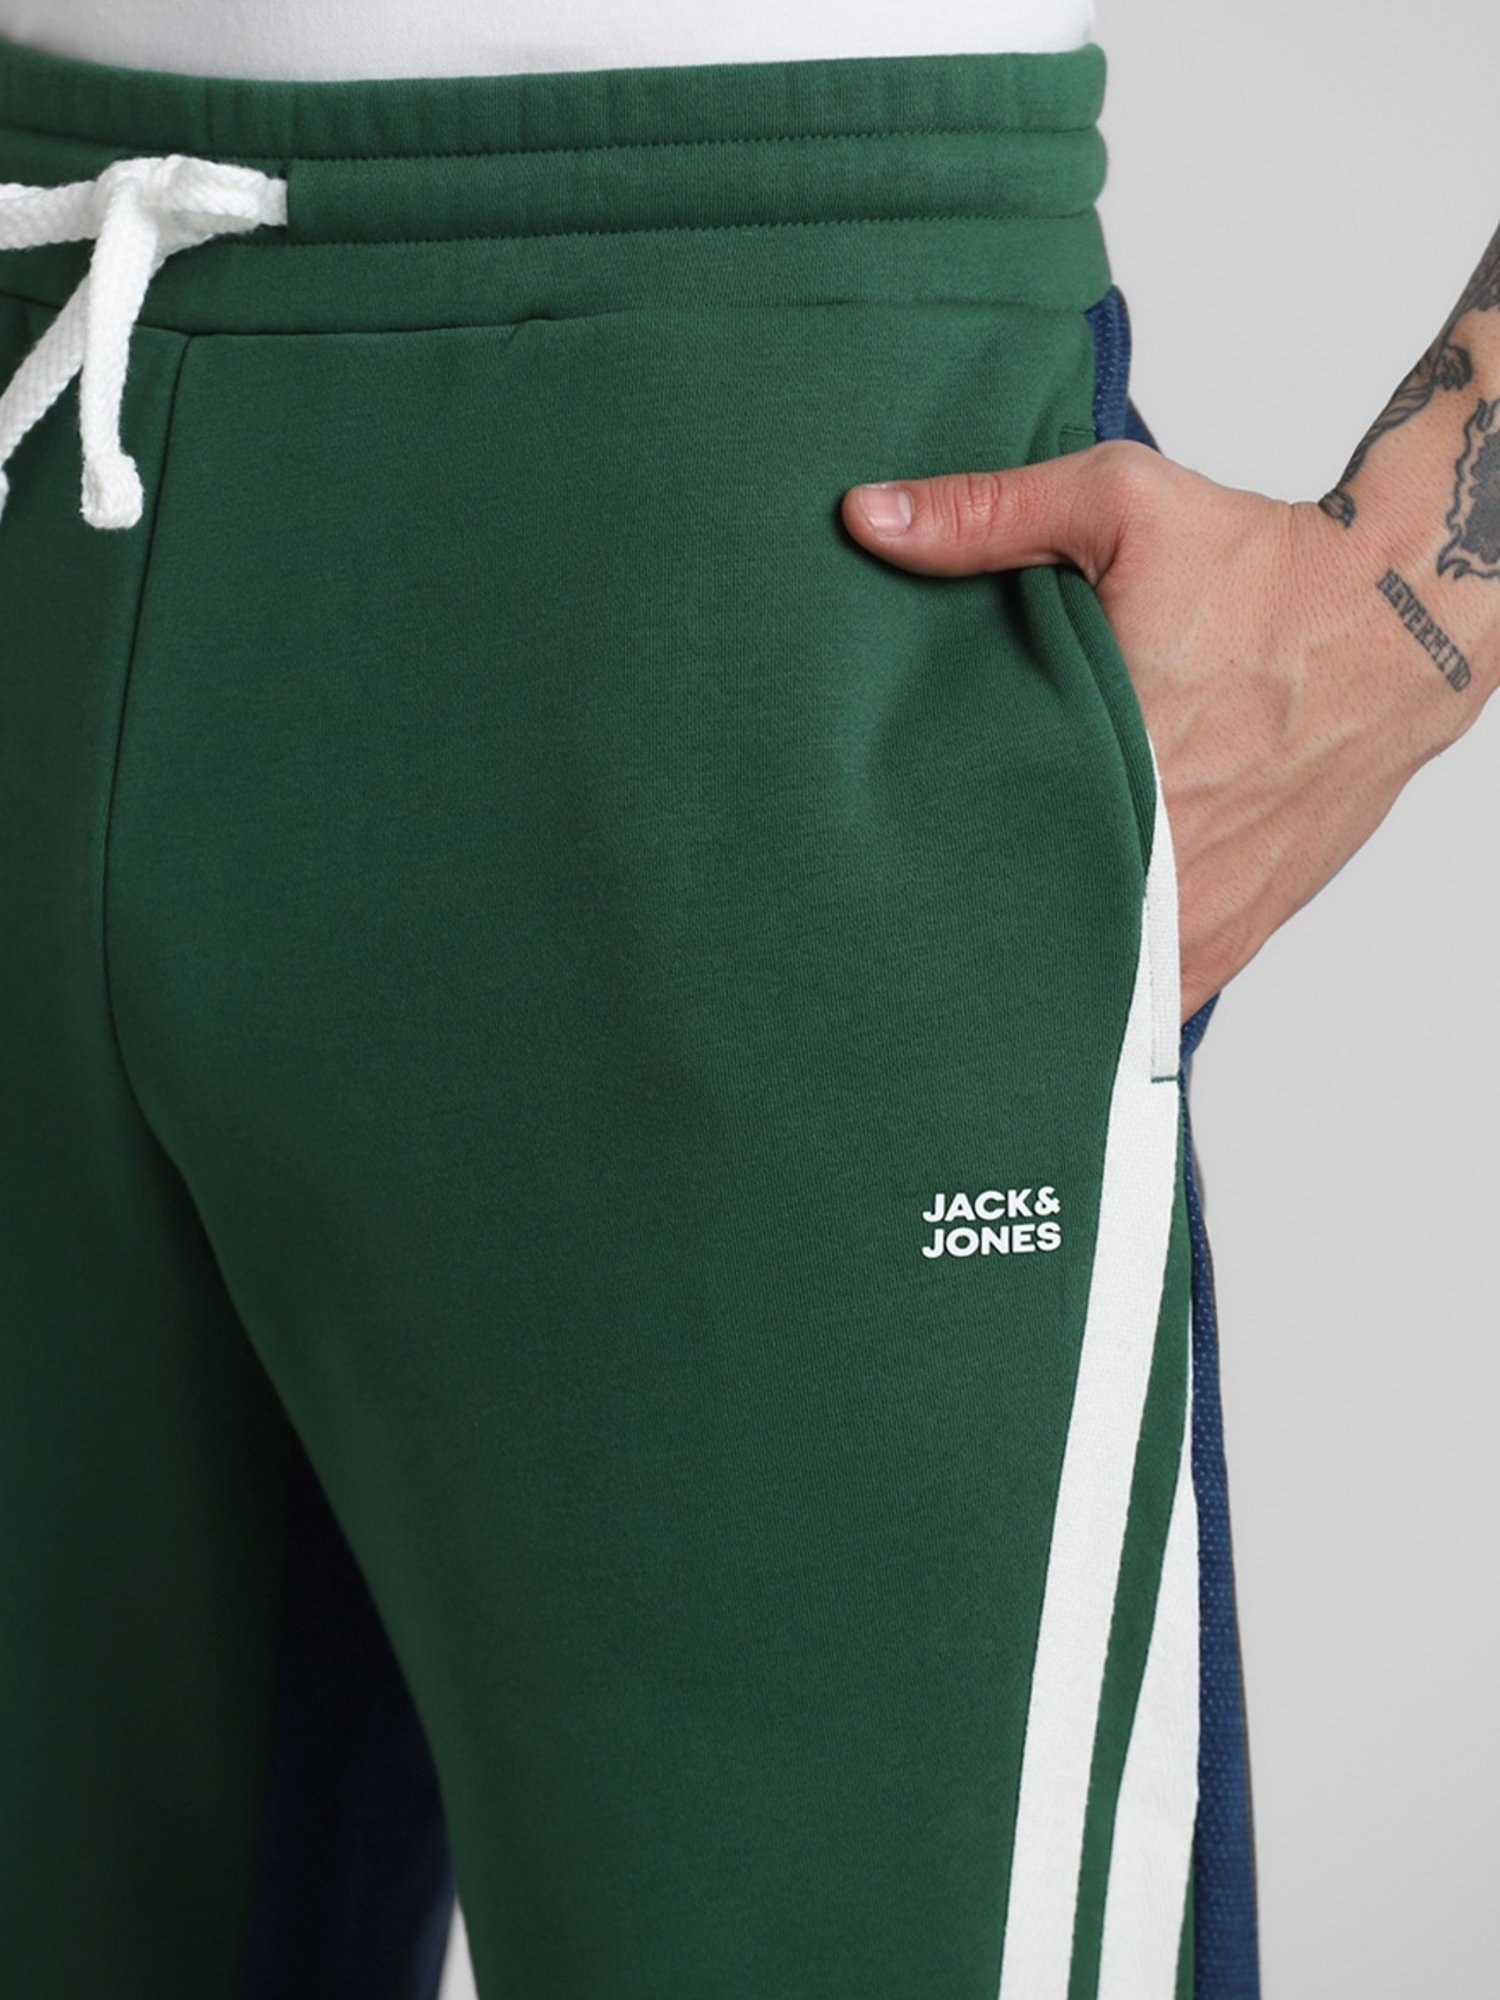 Jack & Jones Men's Classic Track Pants (12233318-Red Clay_Red : Amazon.in:  Clothing & Accessories